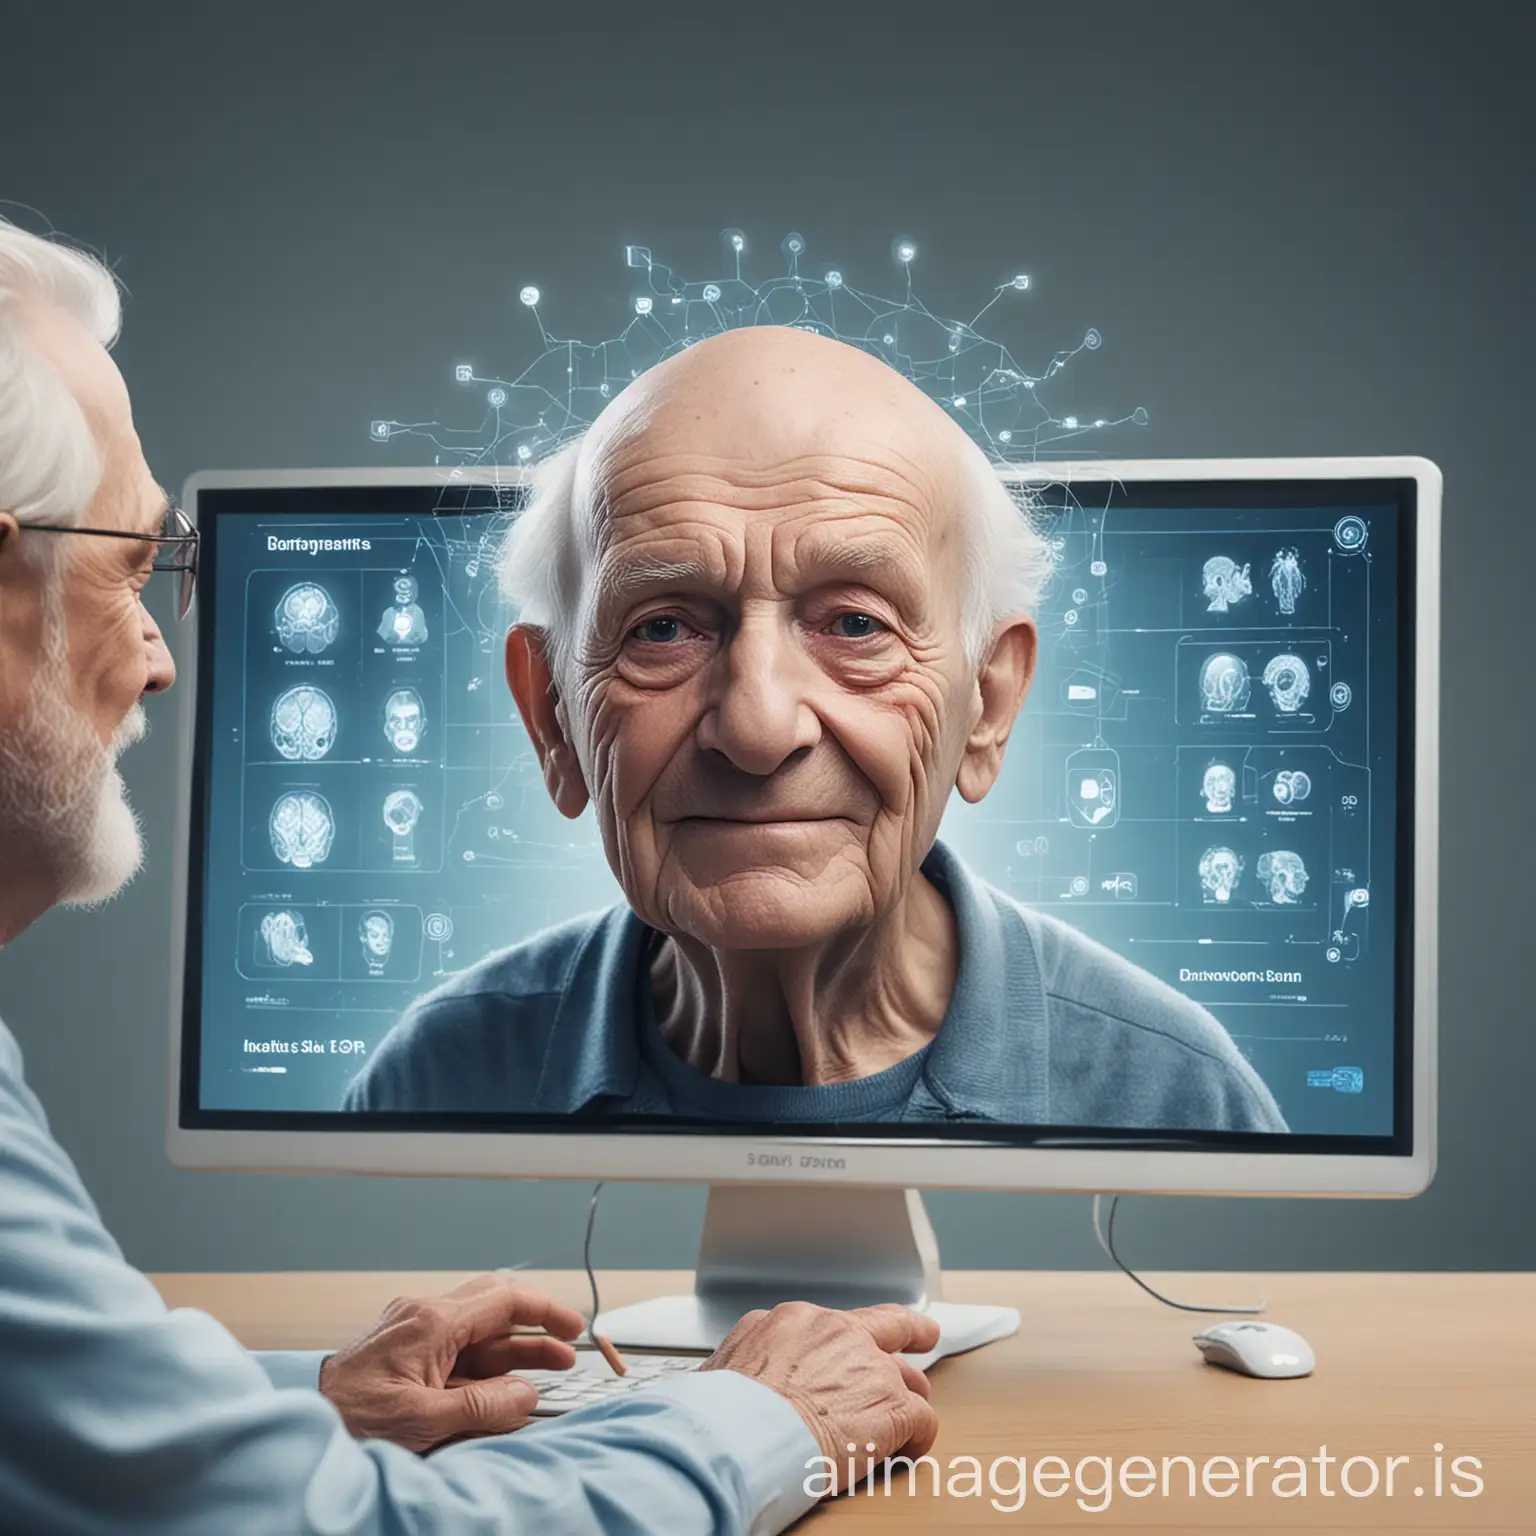 Technology and CarenDescription:nnBackground: A soft blue gradient, representing technology and care.nMain body: An old man smiling at the screen, with an interface of a brain game on the screen.nDetails: Next to the elderly person there are some virtual joint detection key points and a frame line of face recognition, showing the application of technology.nTitle: A brain game dedicated to senile dementia patients based on face recognition and joint detectionnSubtitle: Brain games and rehabilitation training